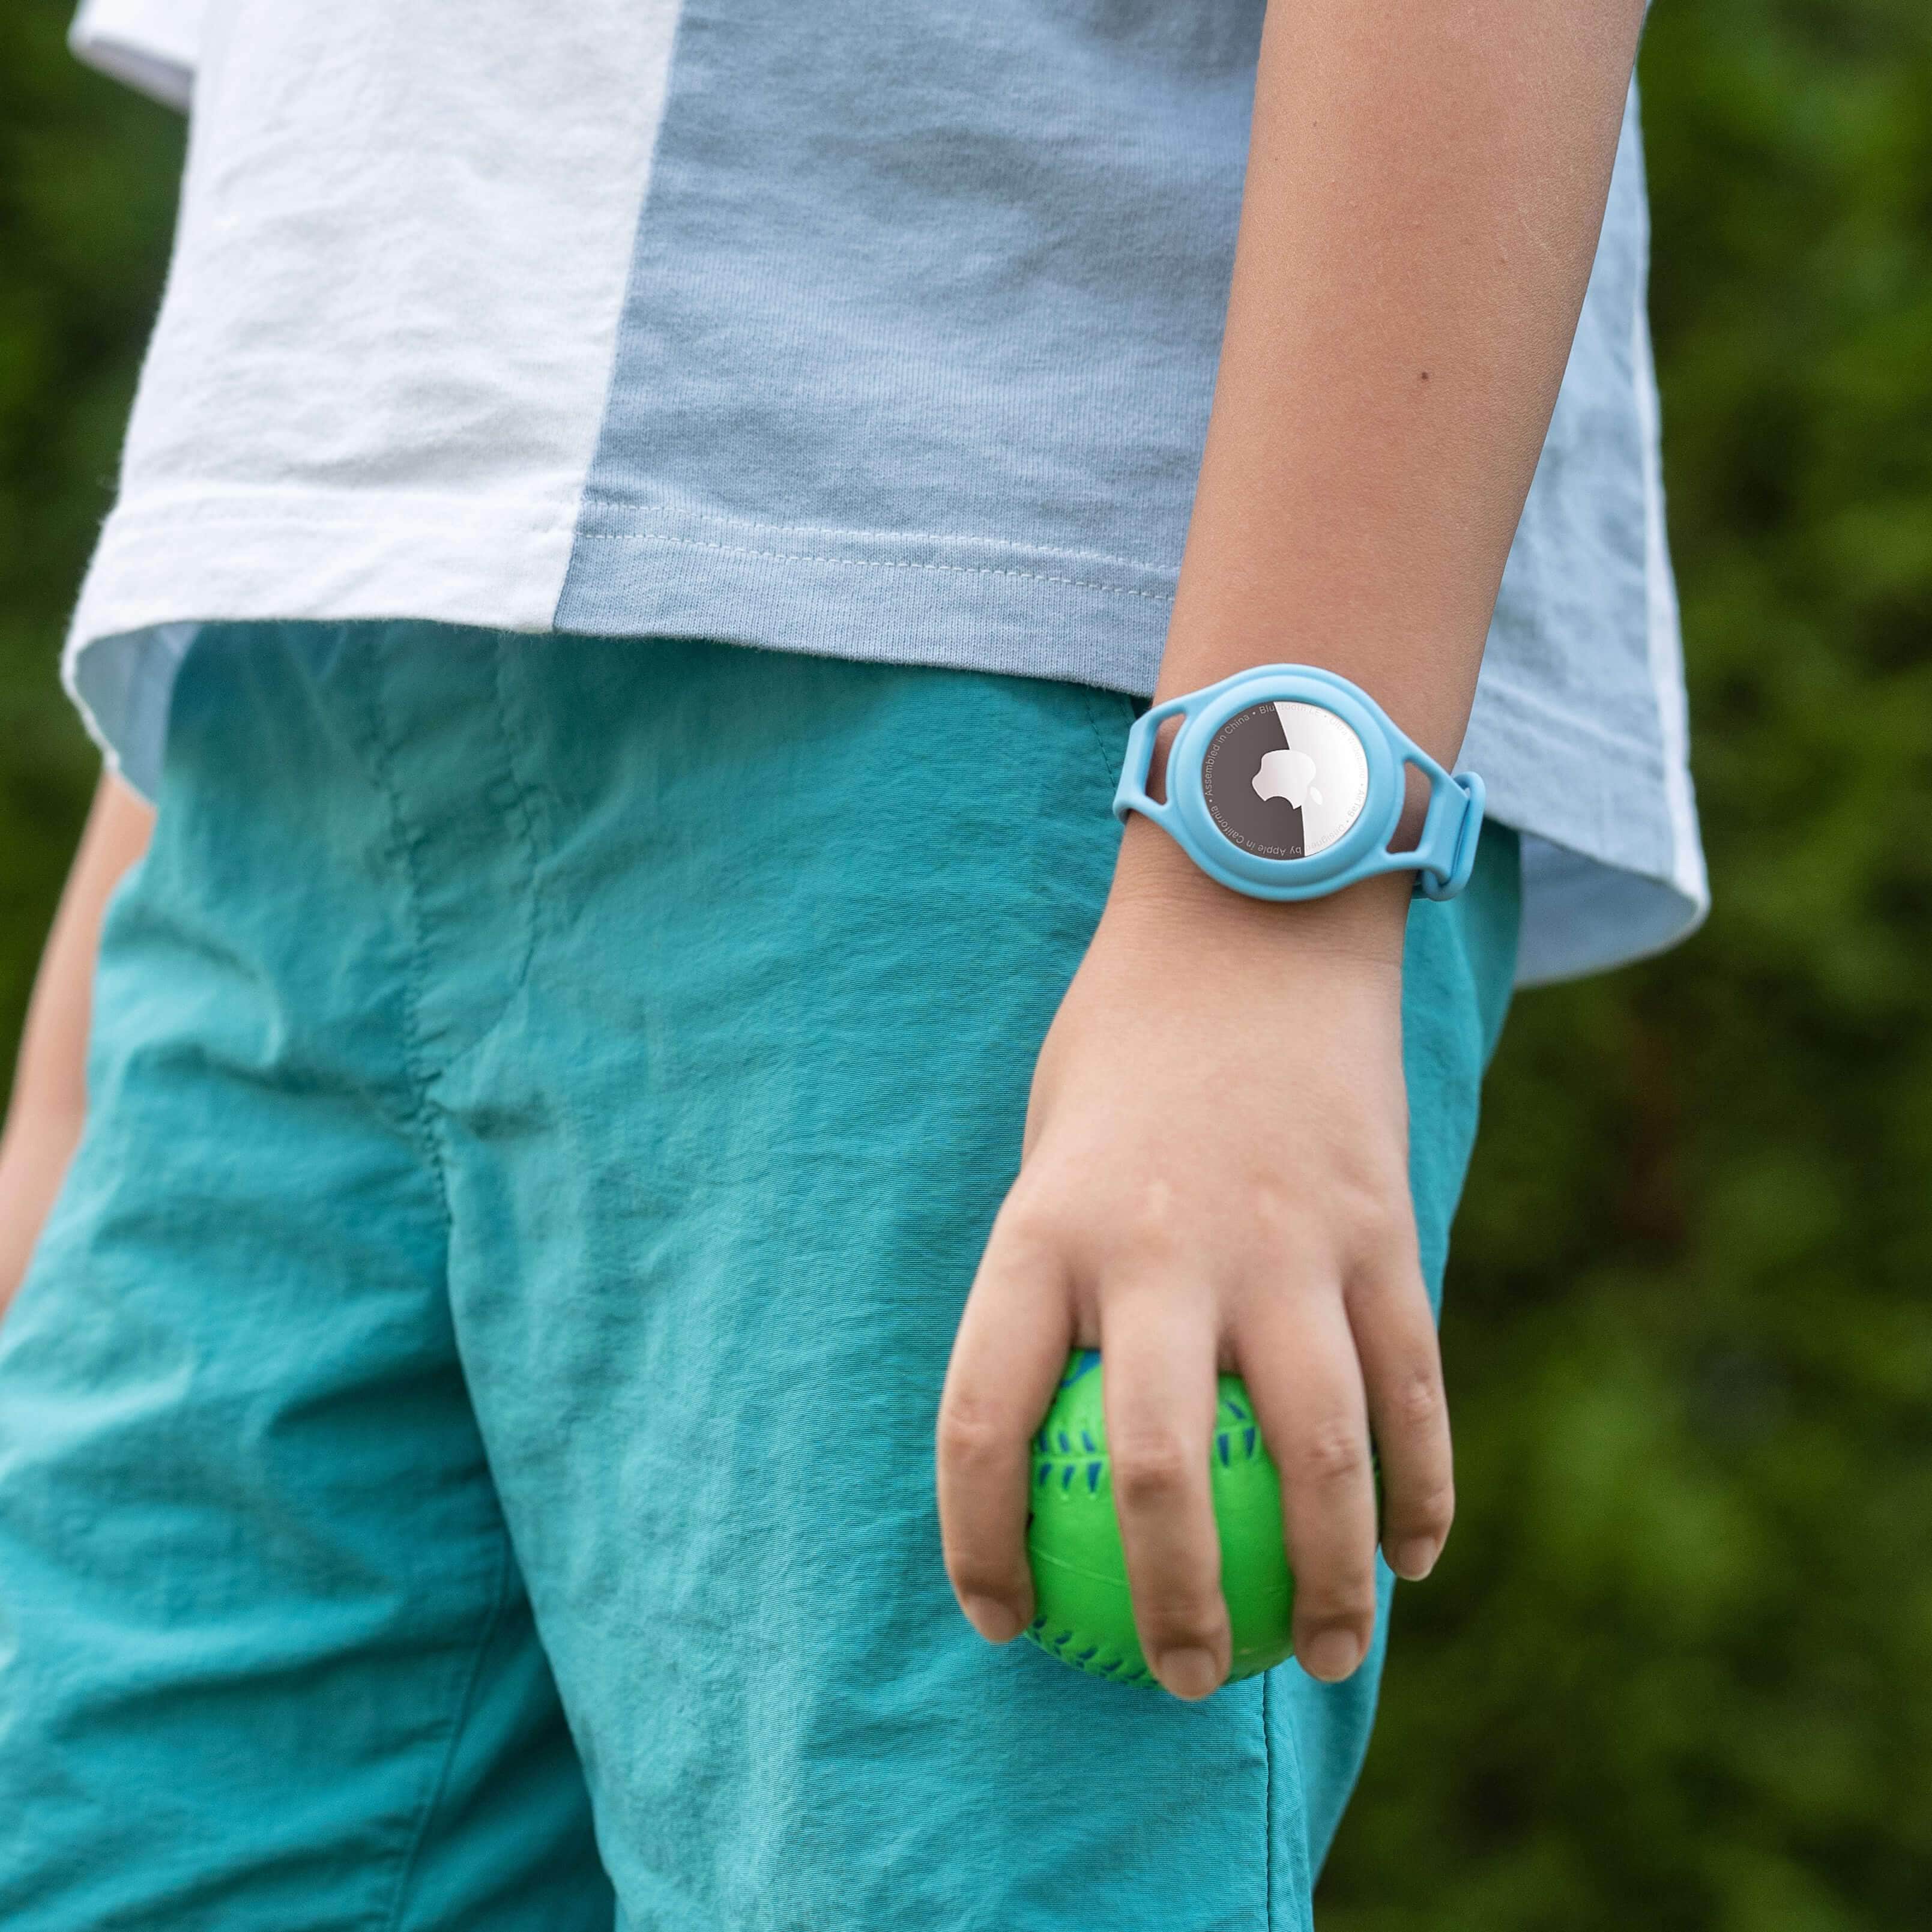 Kid holding ball in hand with tracker bracelet on wrist. color::Blue